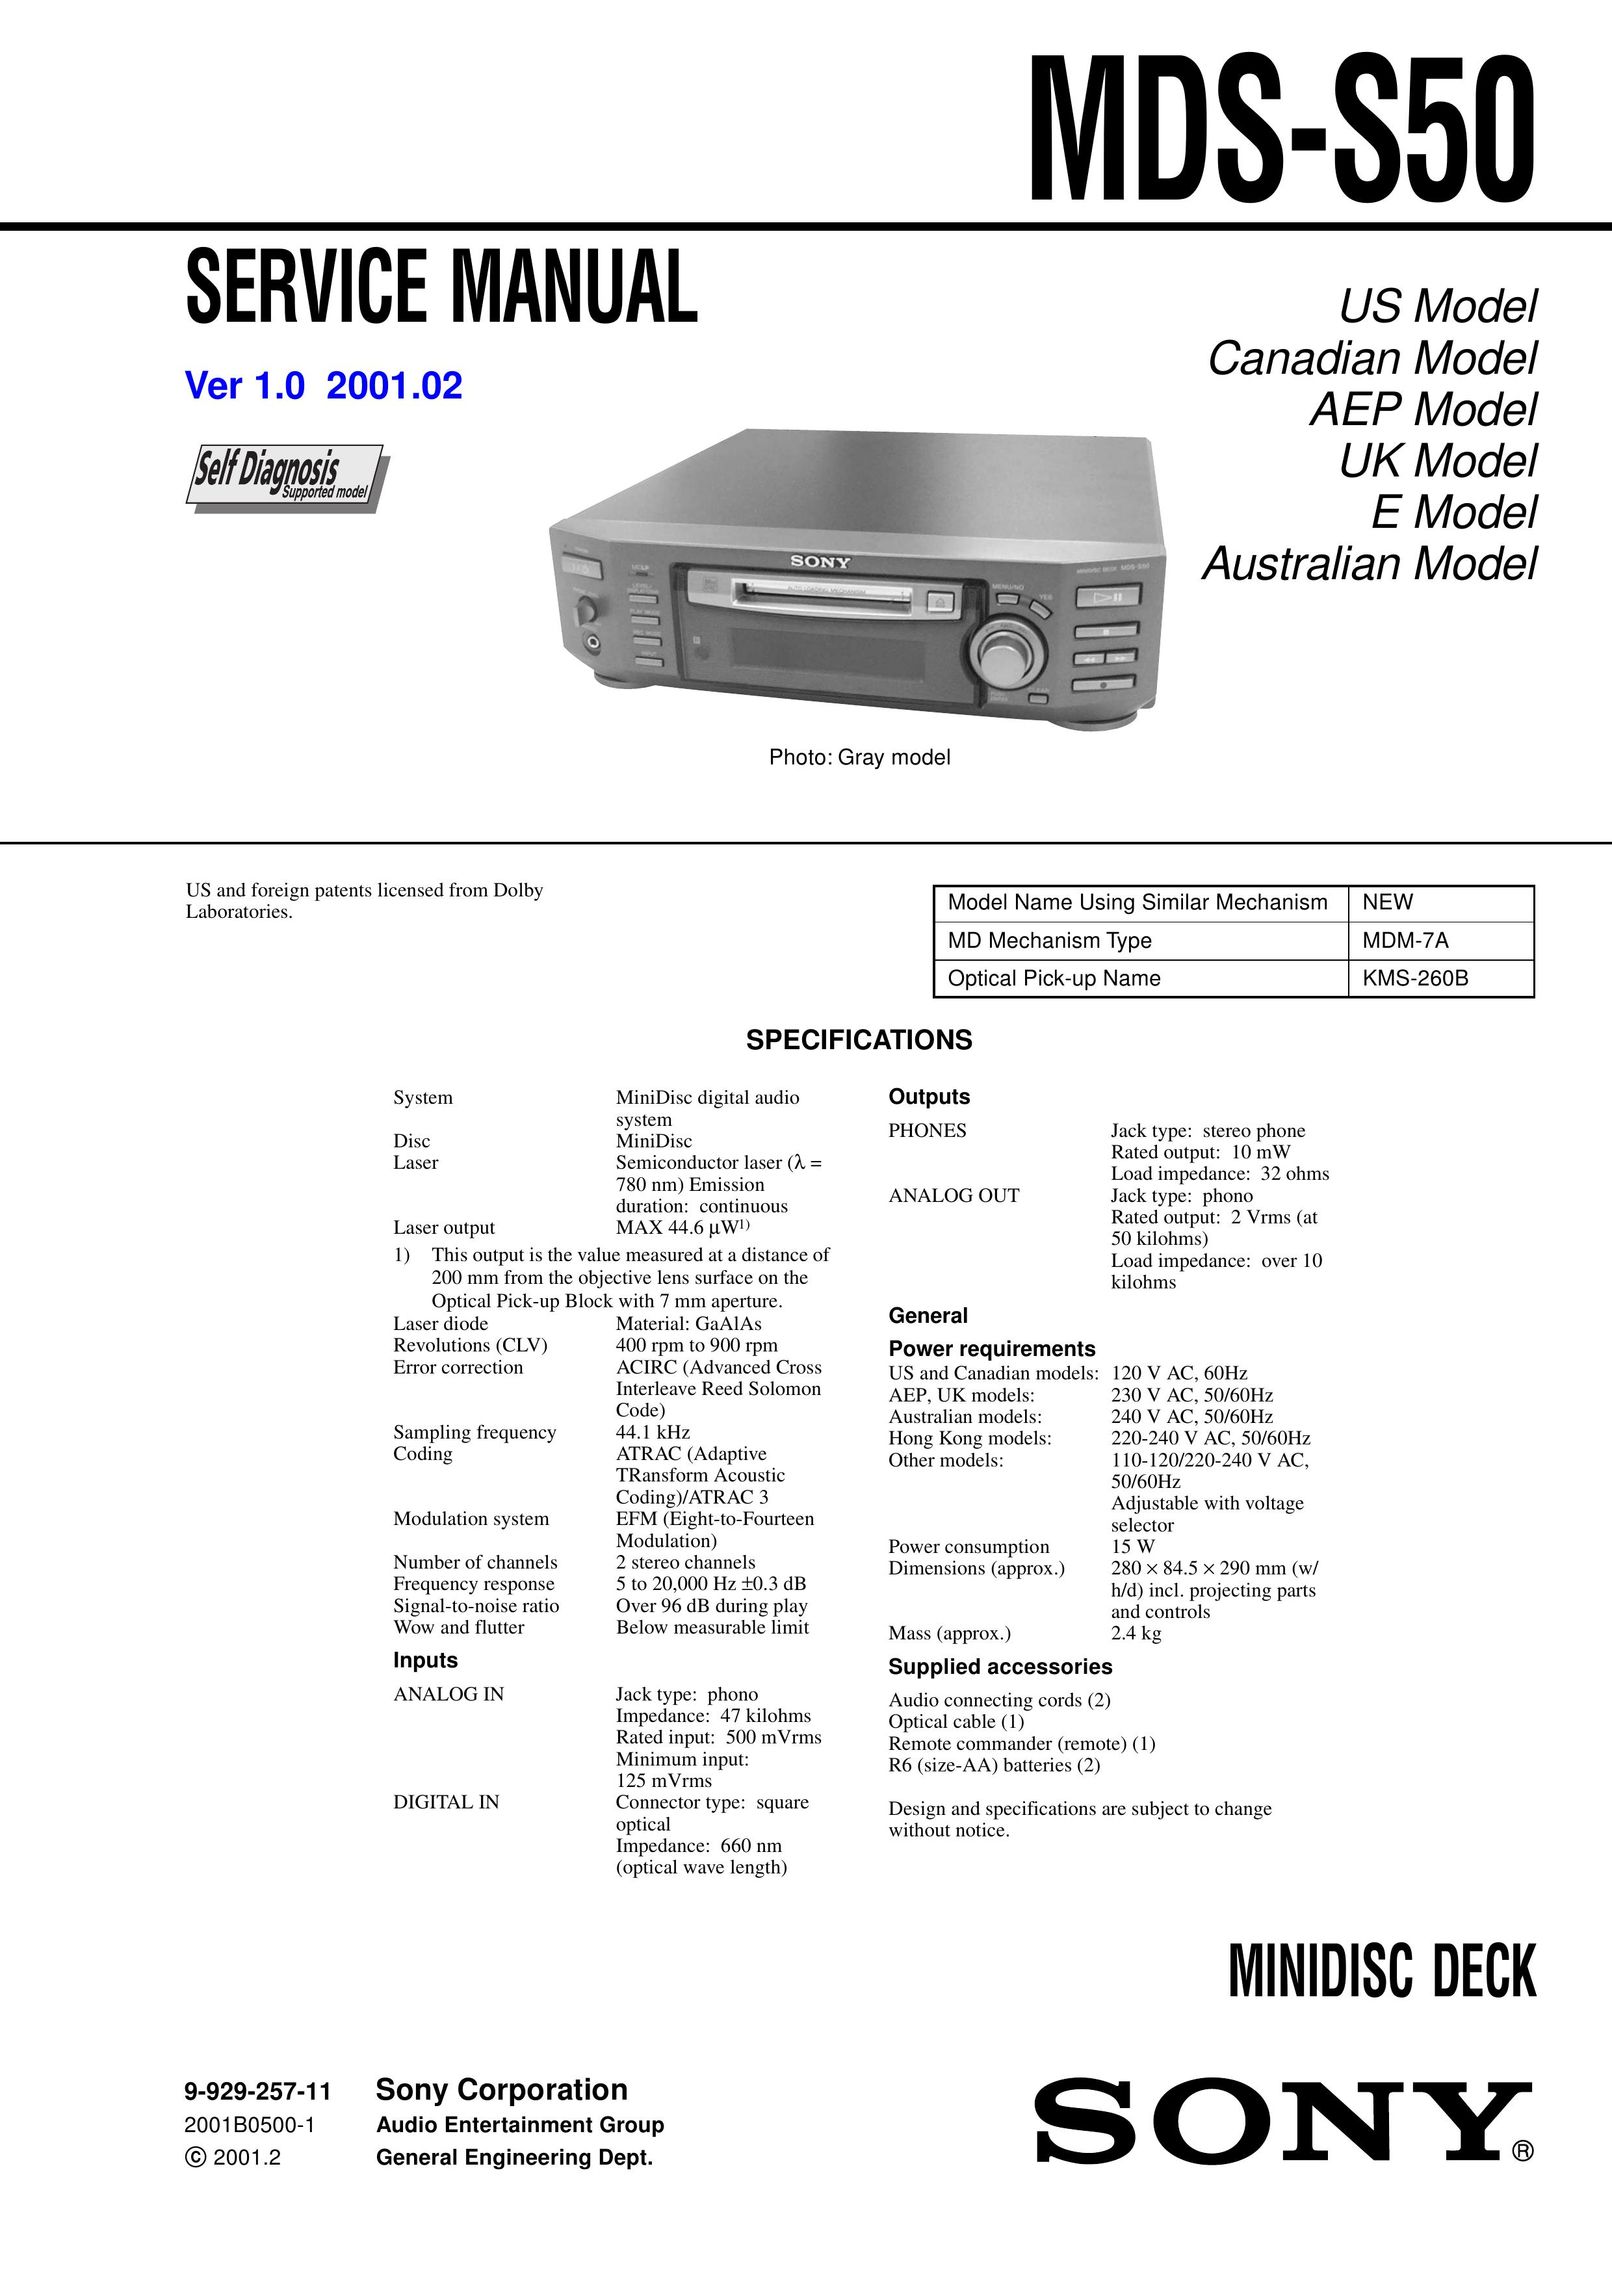 Sony MDS-S50 MiniDisc Player User Manual